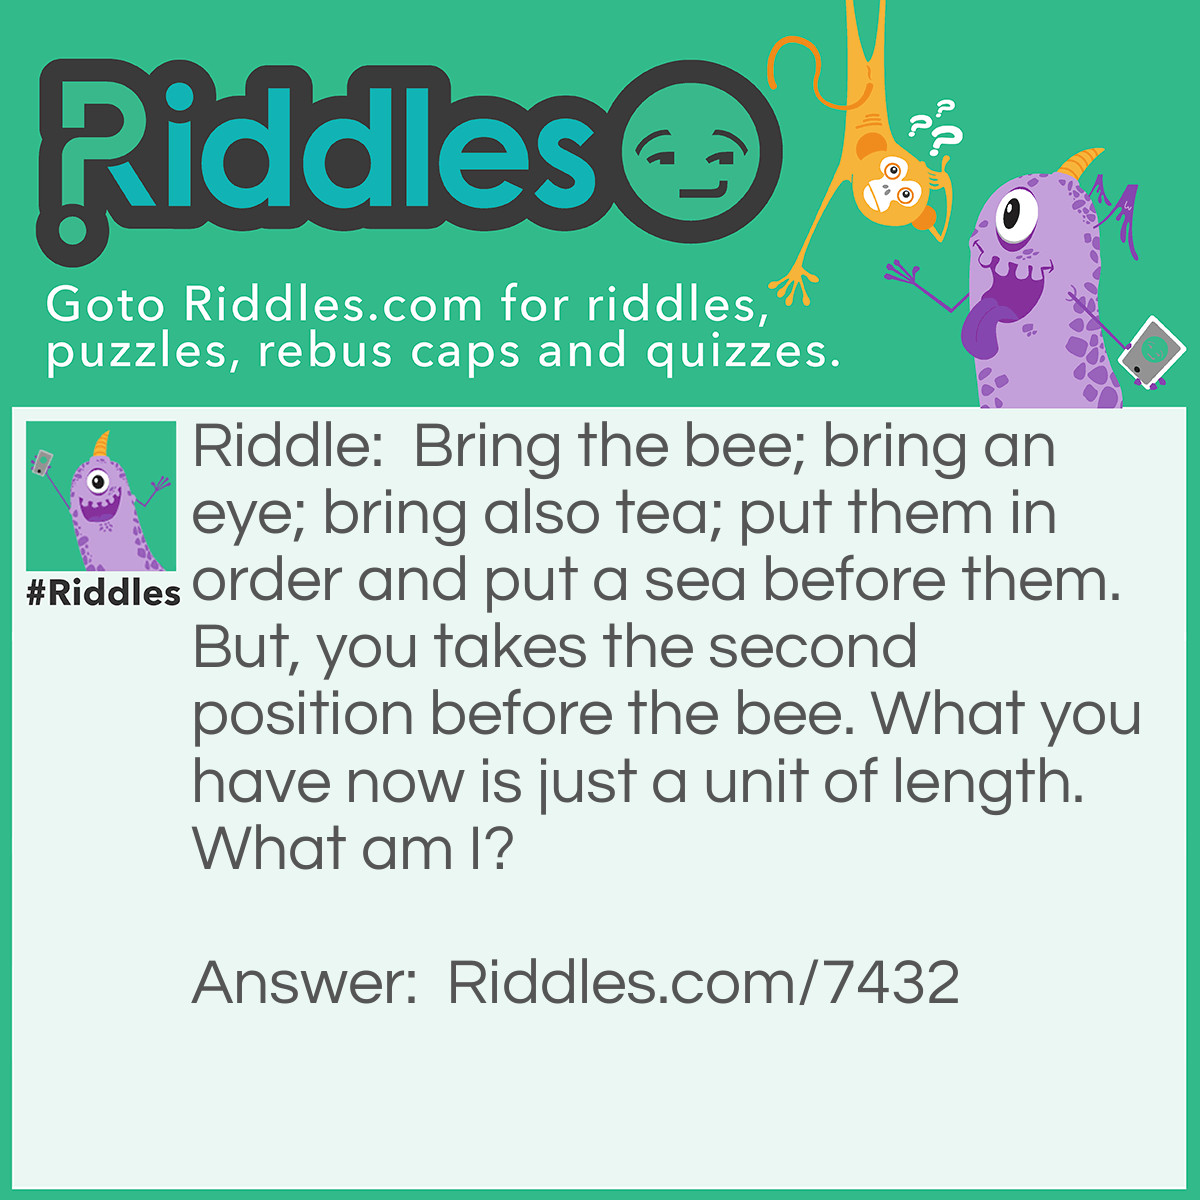 Riddle: Bring the bee; bring an eye; bring also tea; put them in order and put a sea before them. But, you takes the second position before the bee. What you have now is just a unit of length. What am I? Answer: Sea=C; You=U; bee=B; eye=I;Tea=T. So I am CUBIT.